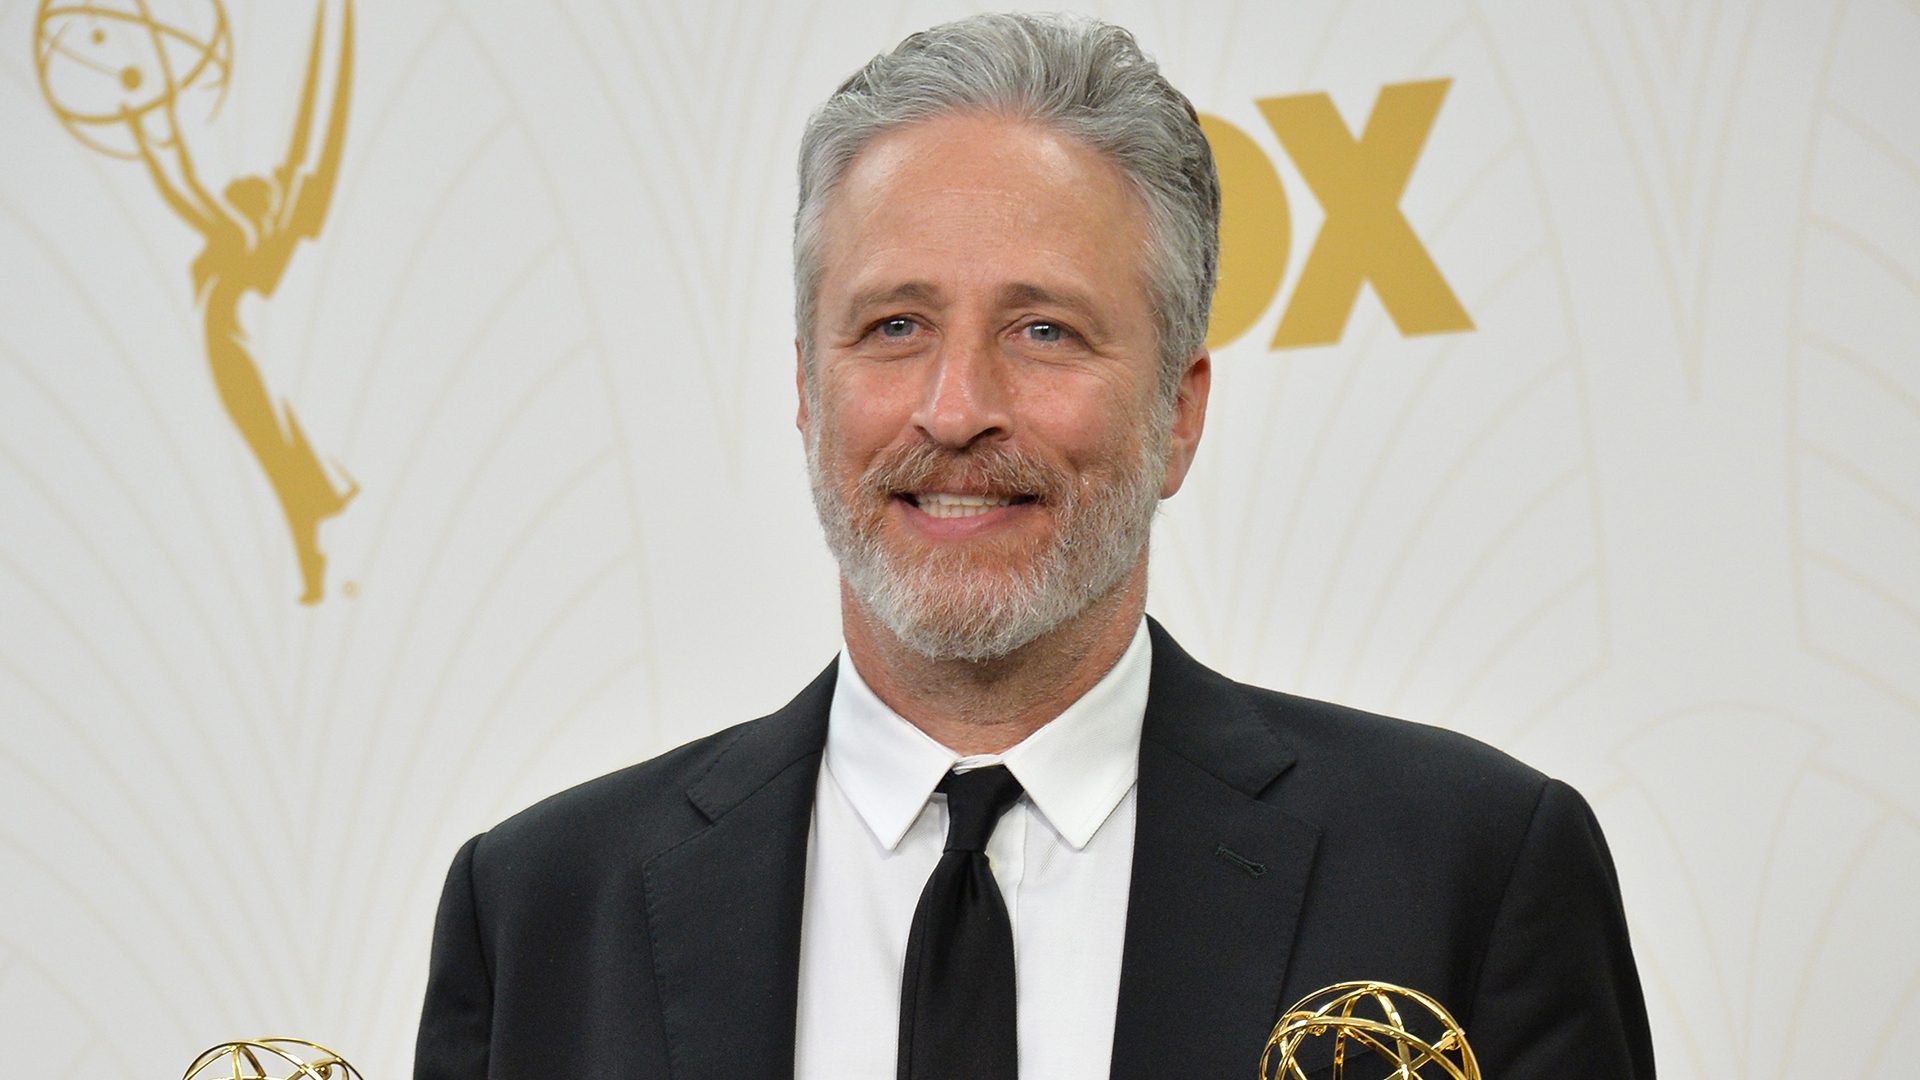 Comedian Jon Stewart feted for humor, advocacy with Mark Twain Prize